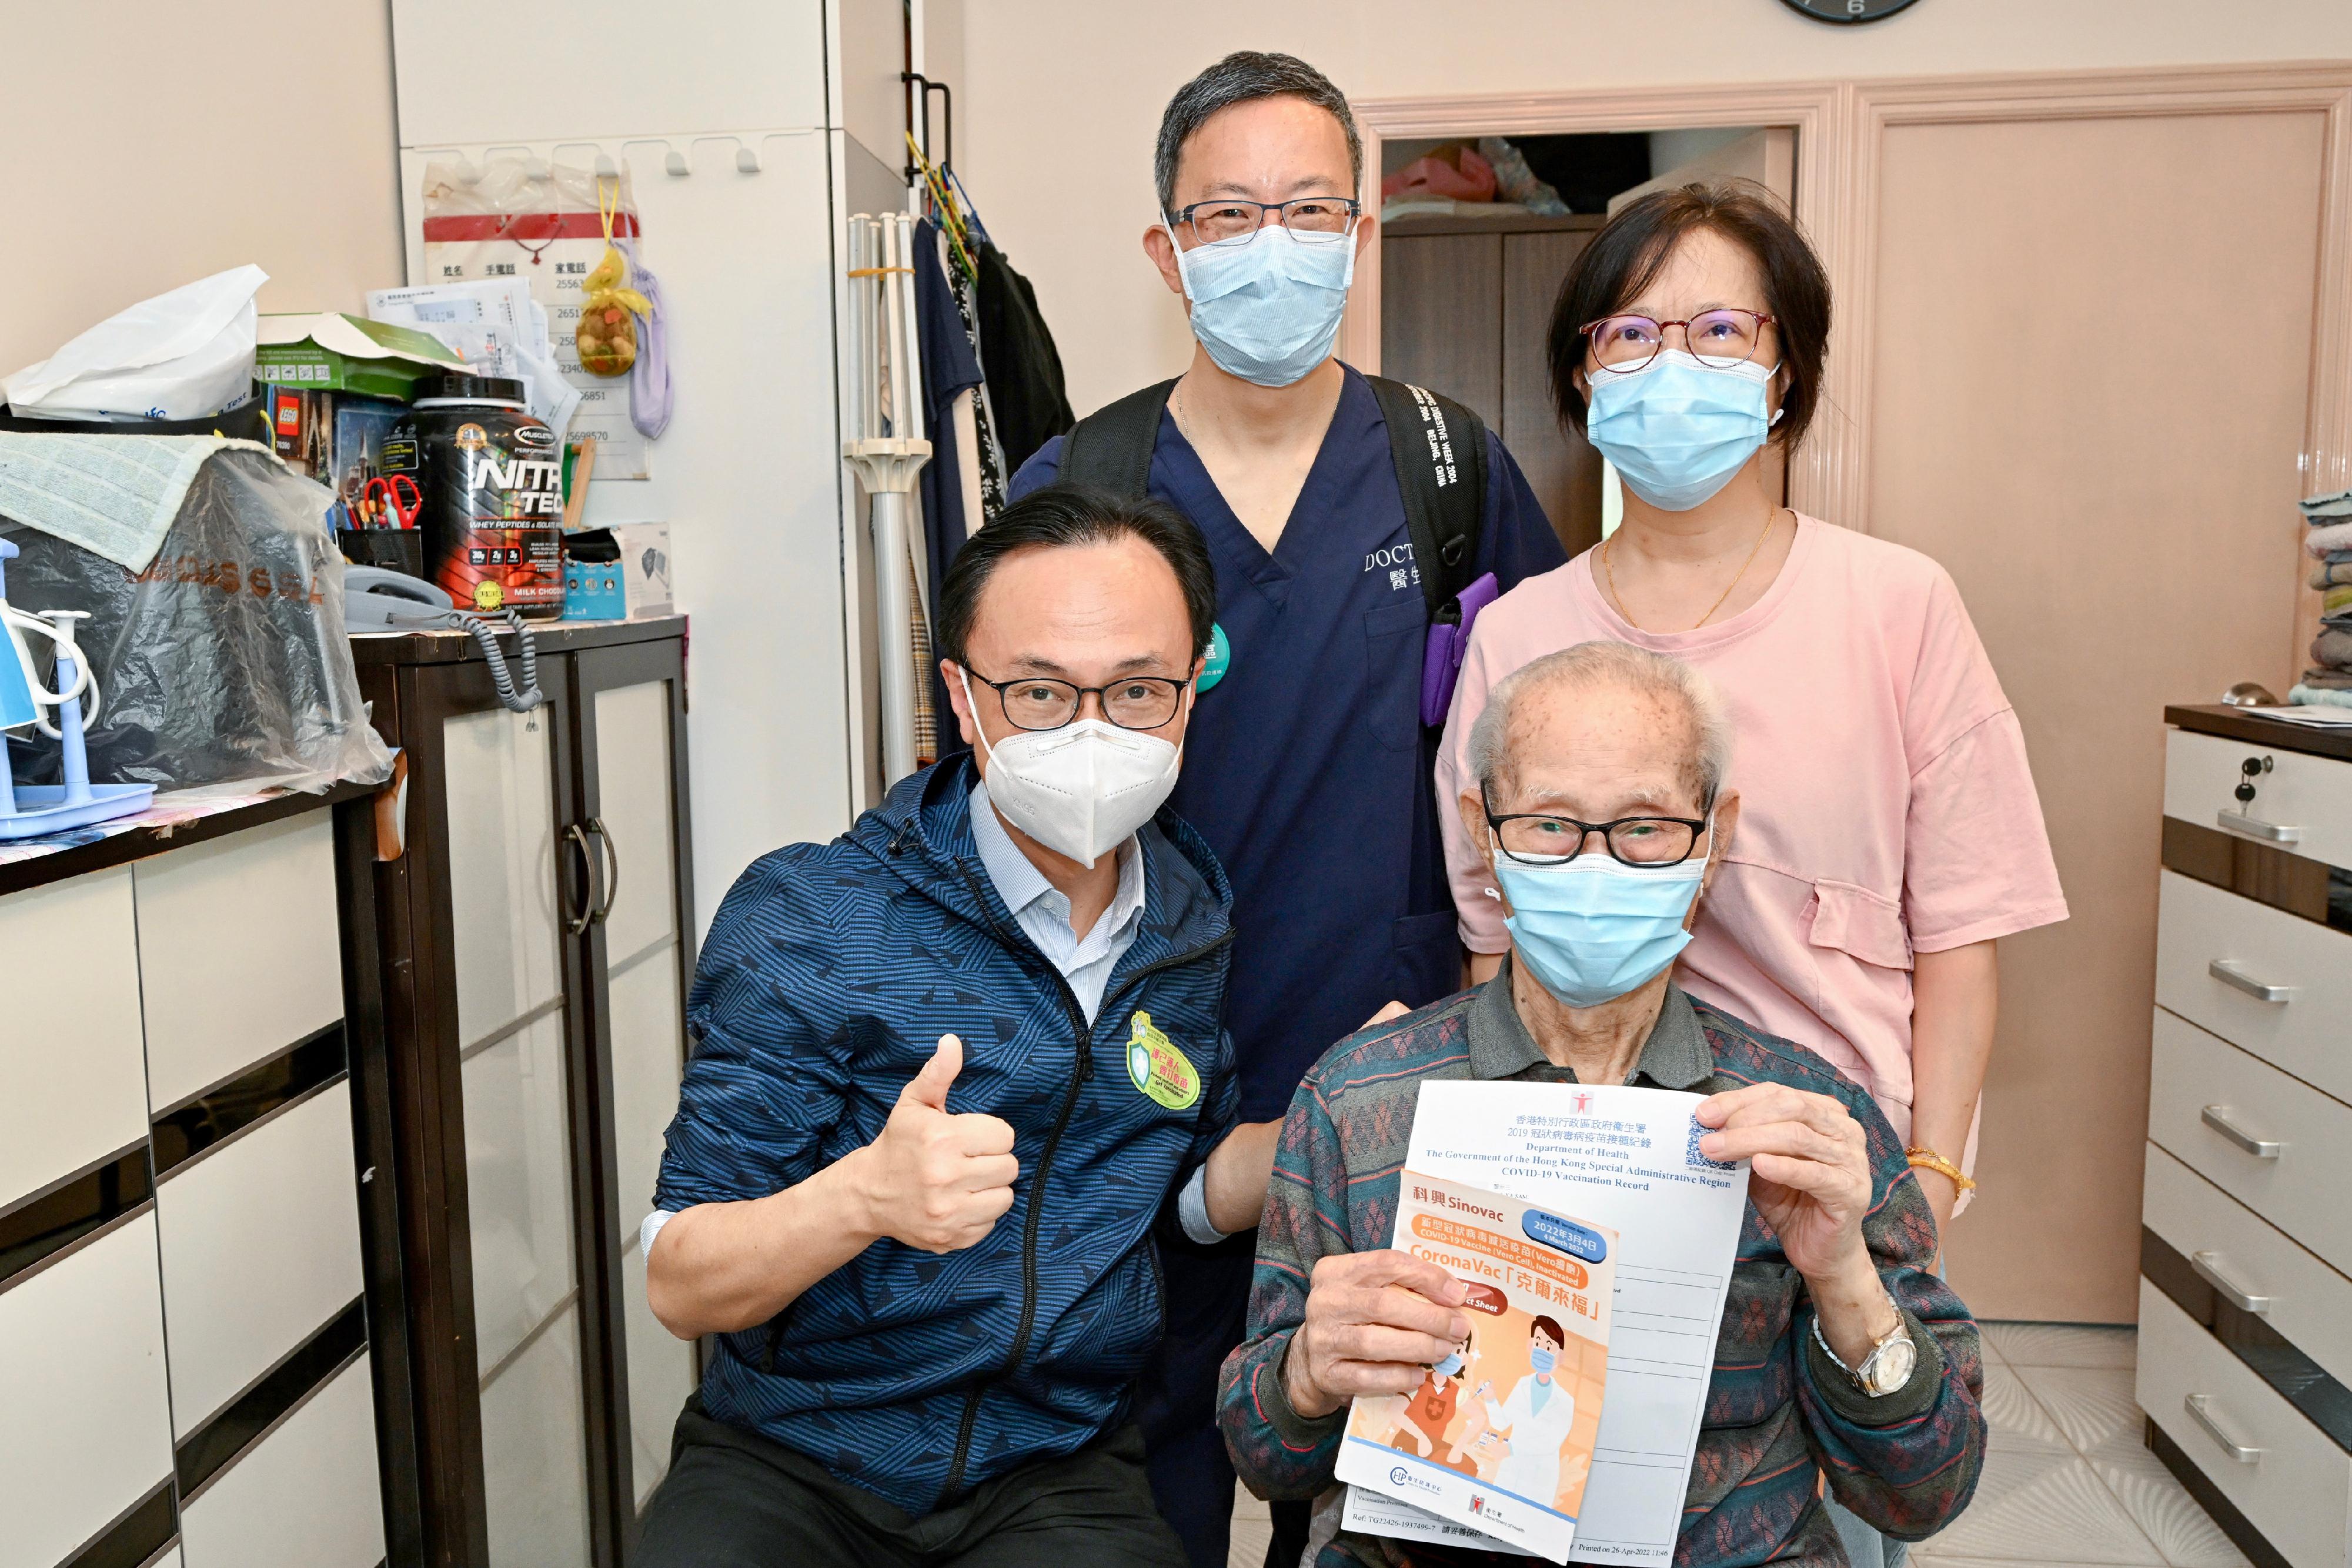 Following the launch of the registration service for door-to-door COVID-19 vaccination last week, the Civil Service Bureau commenced the territory-wide Home Vaccination Service today (April 26) after consolidating the information of eligible persons and matching them to medical teams. Photo shows the Secretary for the Civil Service, Mr Patrick Nip (bottom left), and the Legislative Council member for medical and health services, Dr David Lam (top left), joining a picture with a 94-year-old elderly person (bottom right) who just received his first dose of COVID-19 vaccination.